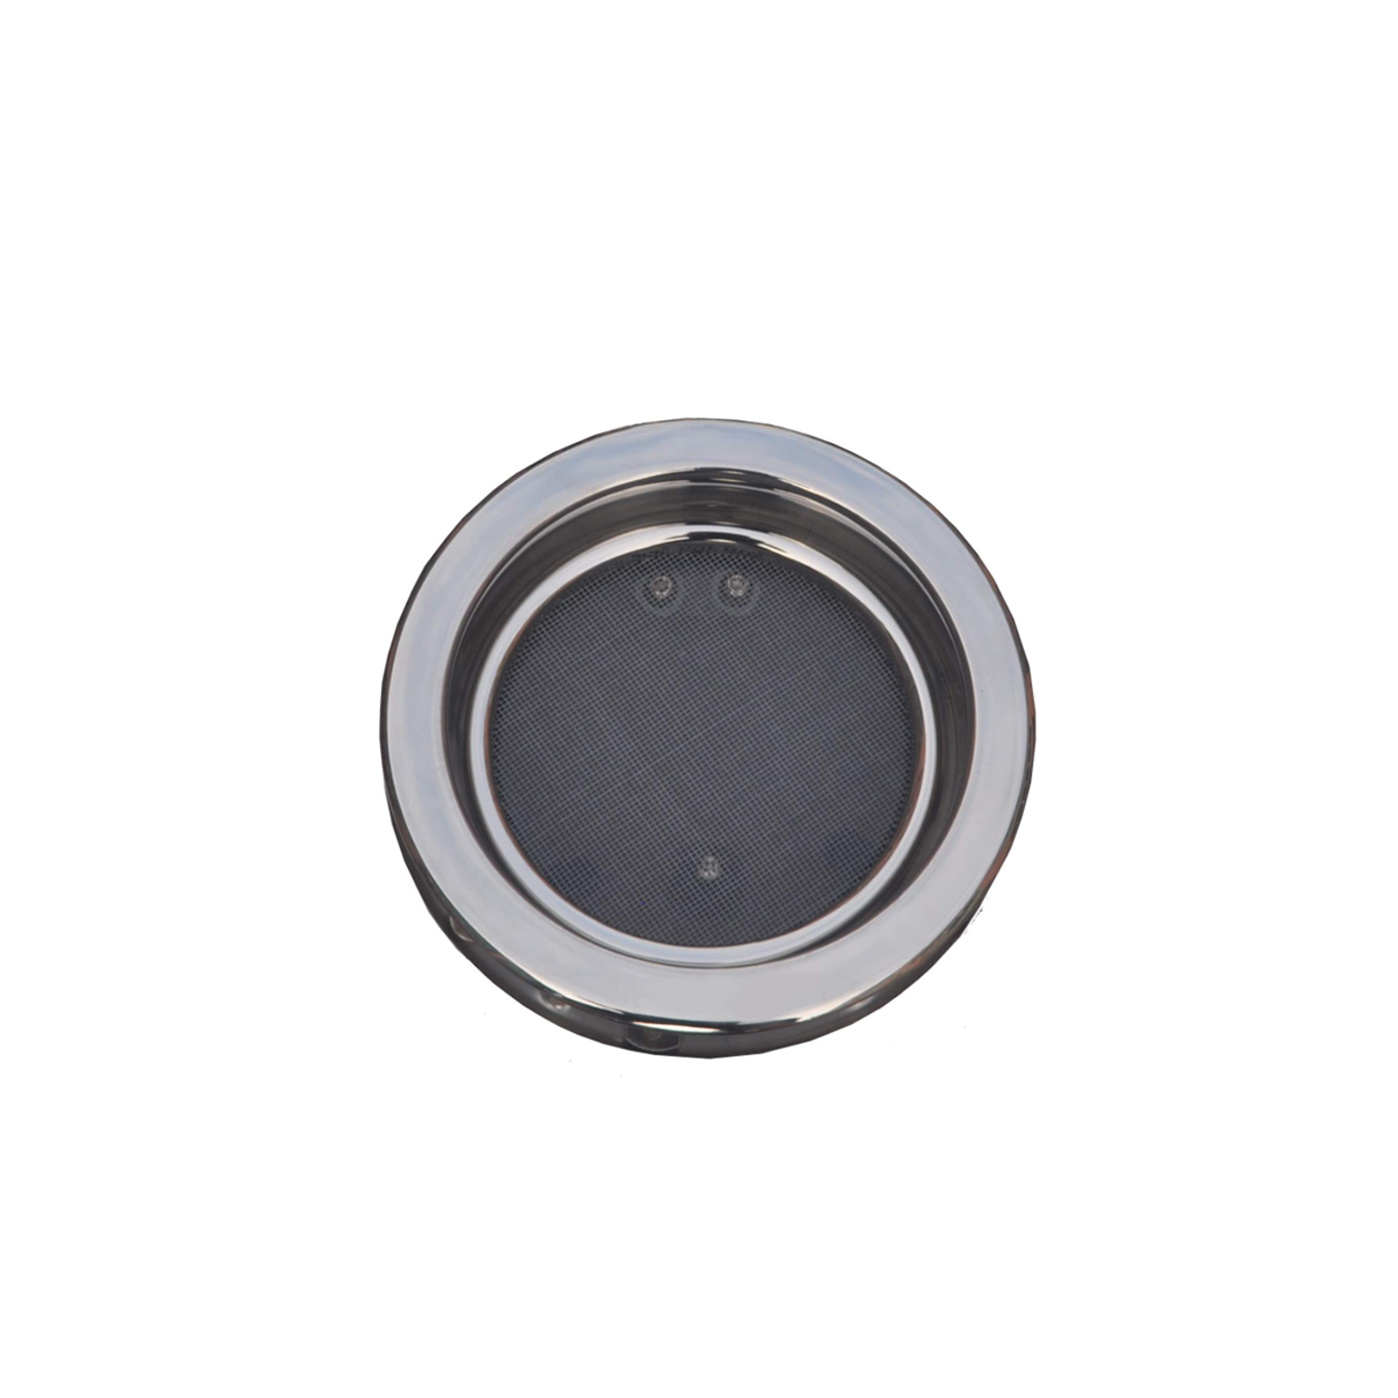 Why Can Marine Round Hatch Porthole from China Manufacturer Become a Key Element in Ship Design